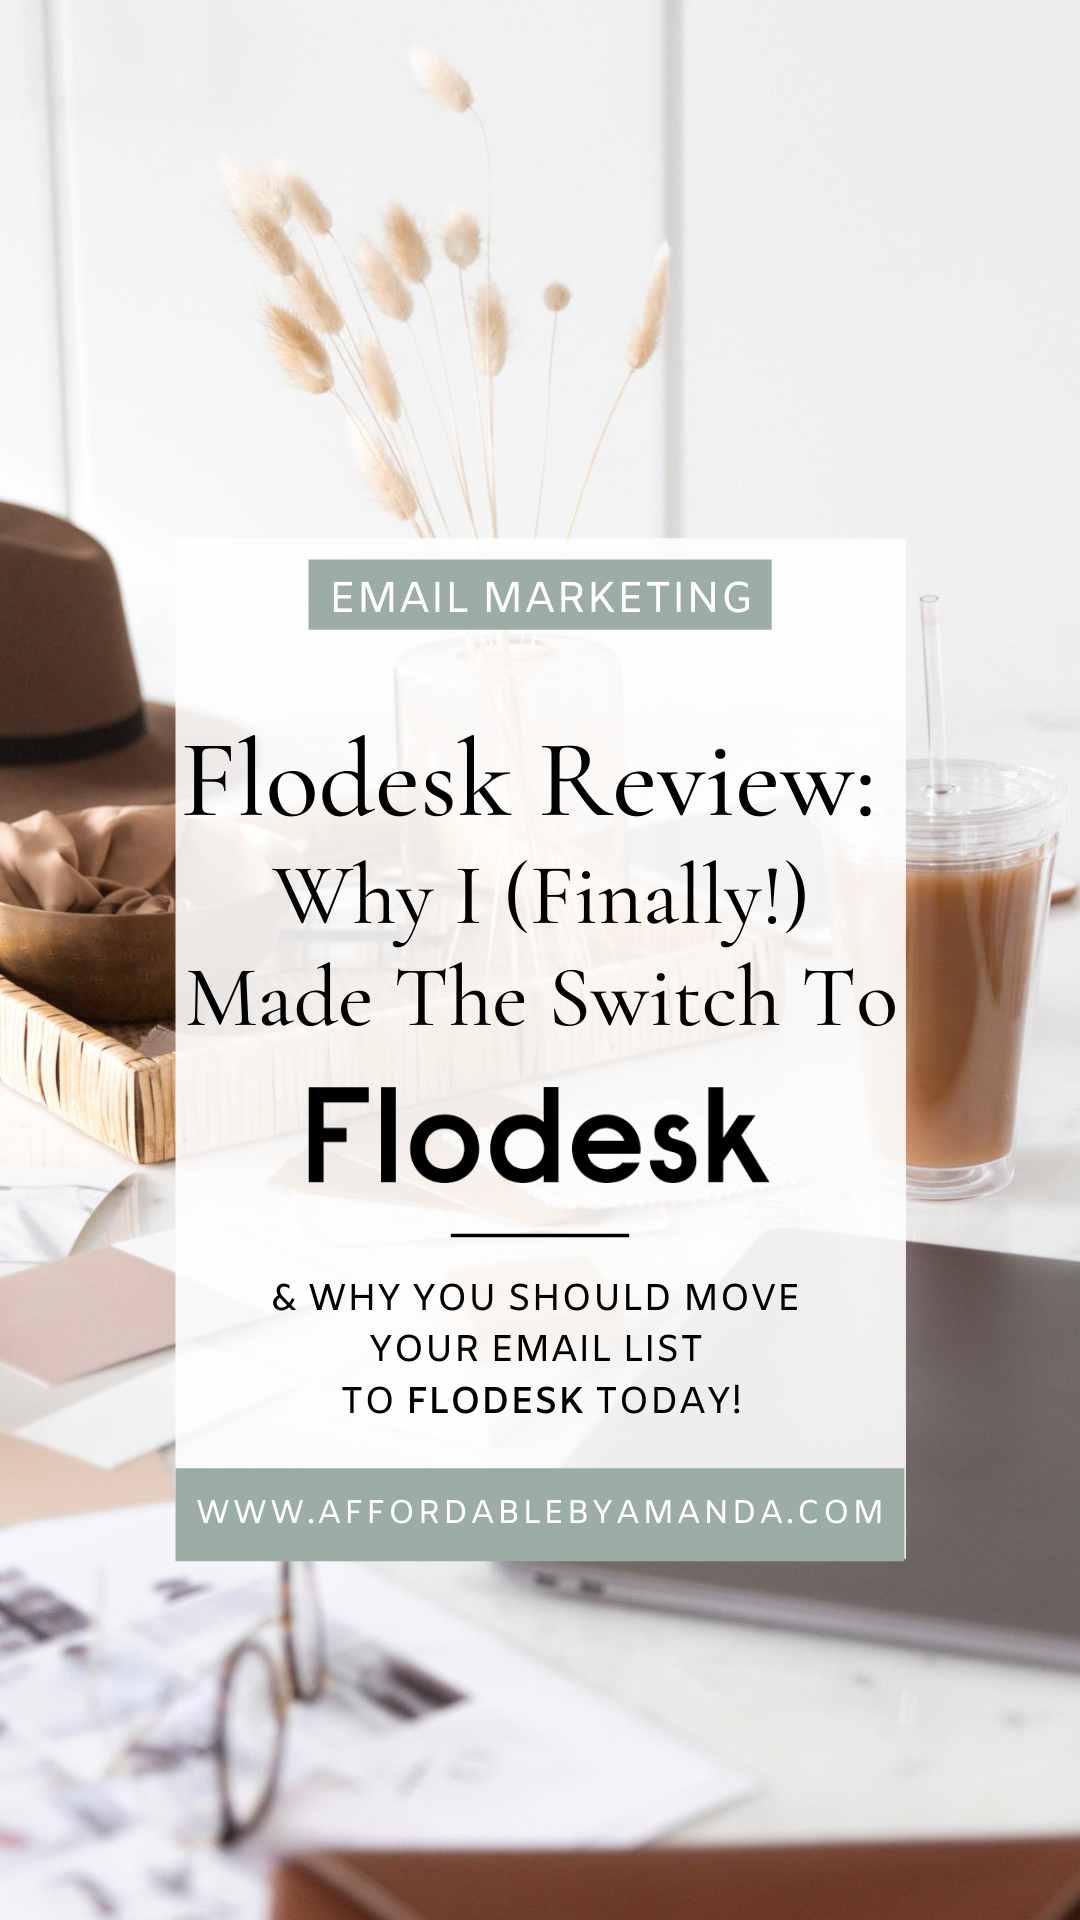 Flodesk Review 2020 | Flodesk Discount Code | Why I Finally Switched To Flodesk | Why You Should Switch to Flodesk Today